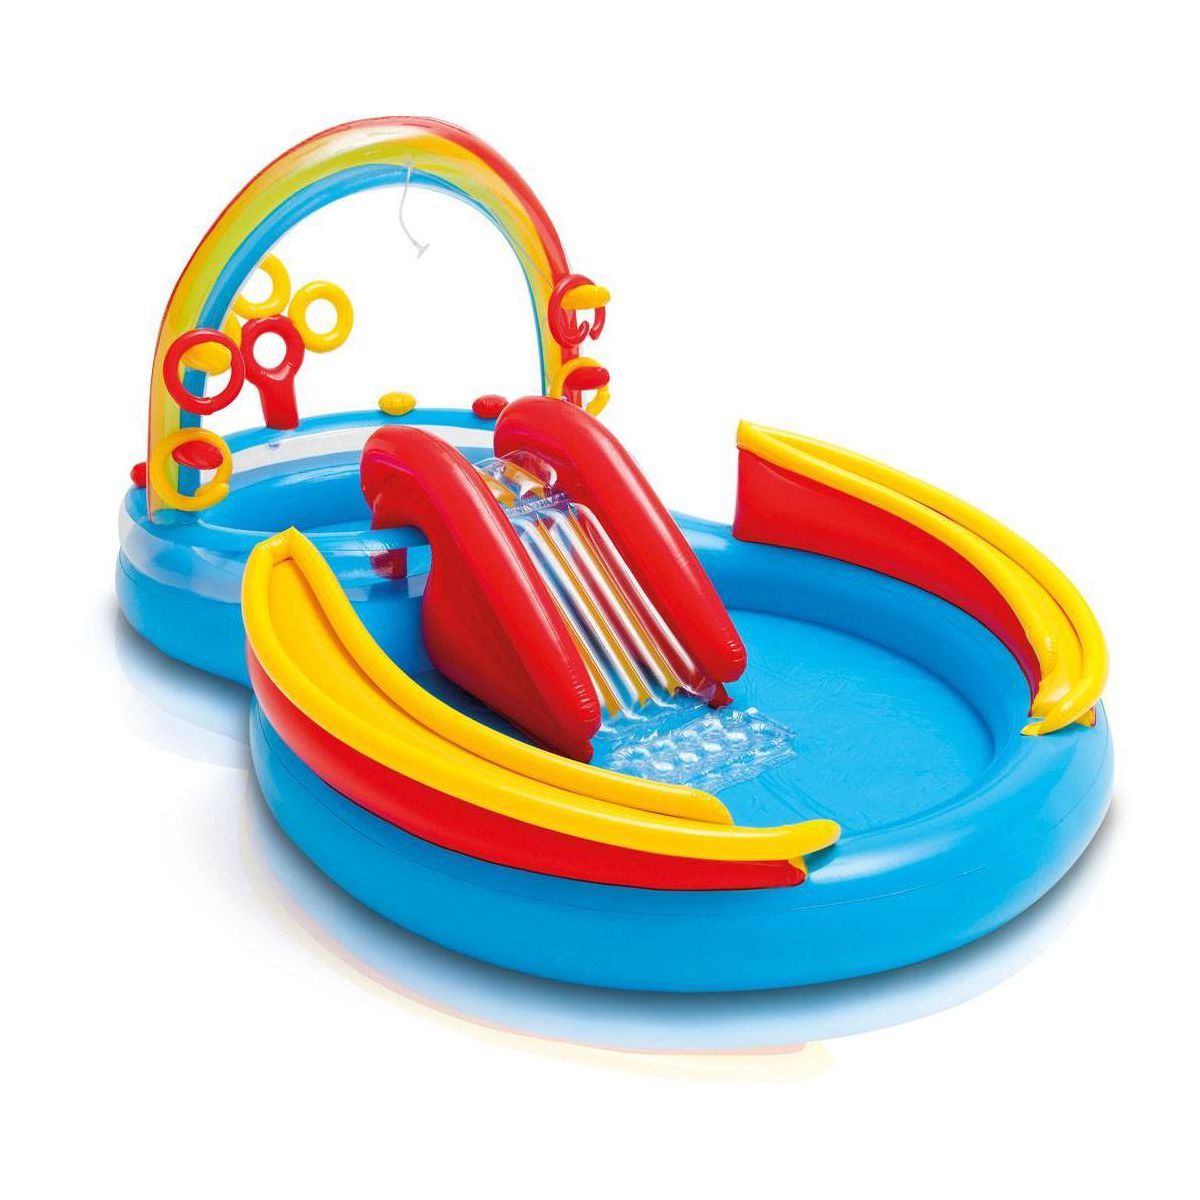 Intex 9.75ft x 6.3ft x 53in Rainbow Slide Kids Play Inflatable Pool Ring Center | Target